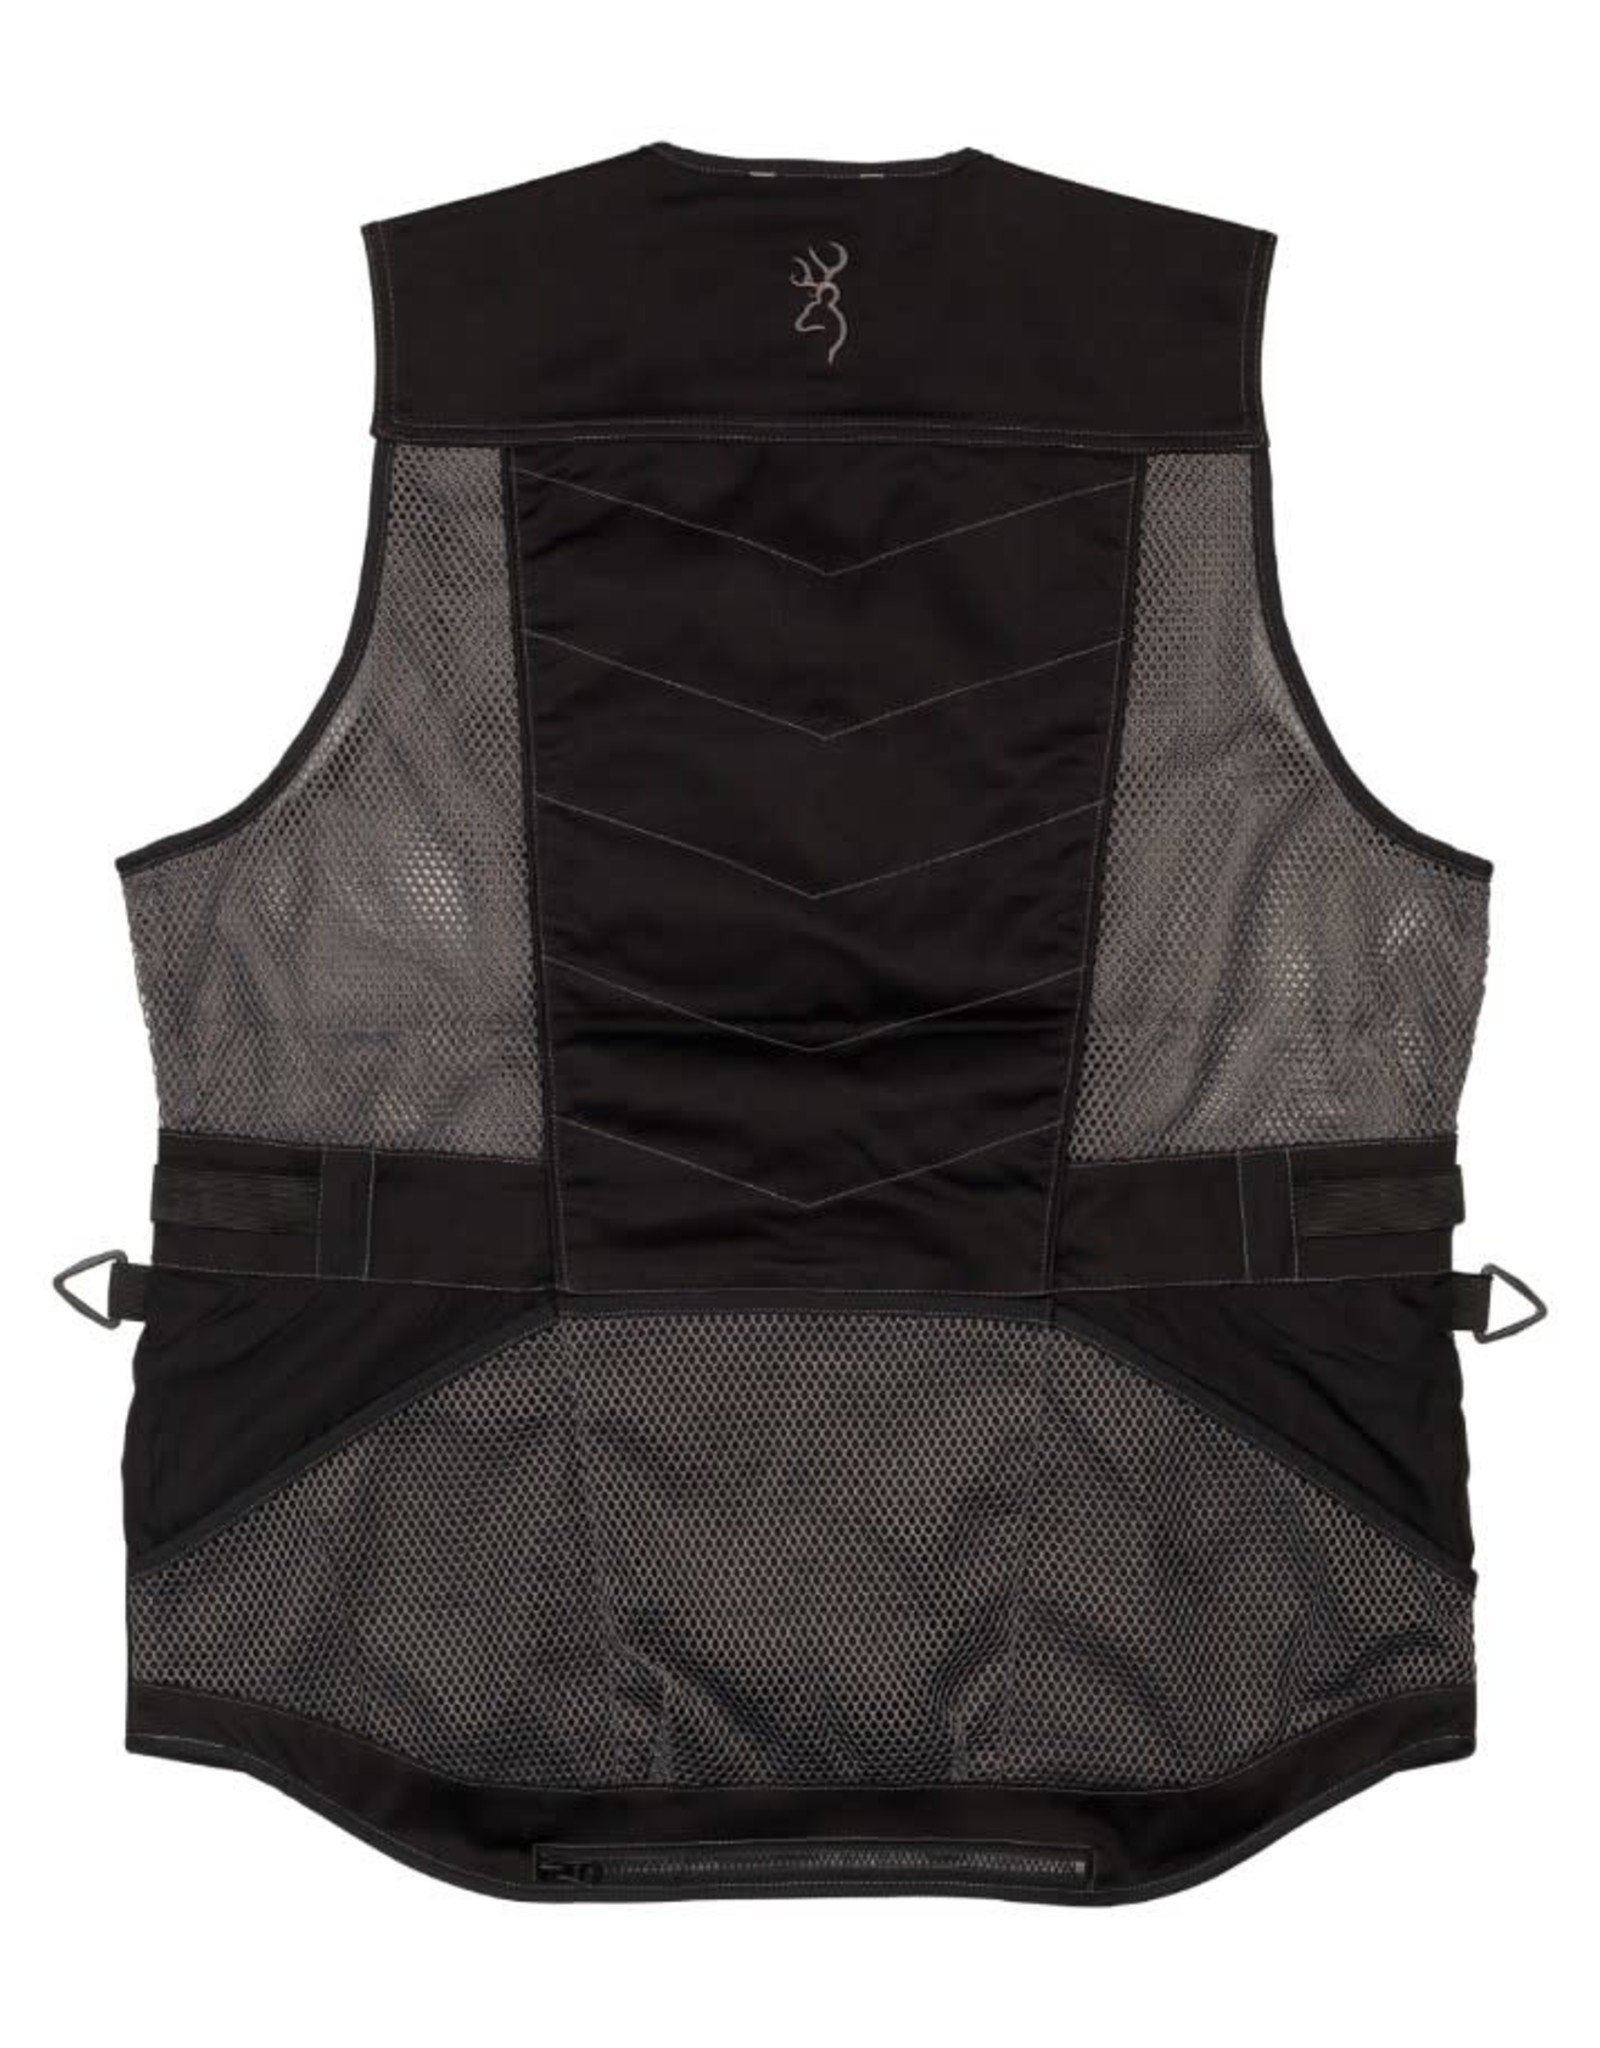 Browning Ace Shooting Vest - Black - 3XL